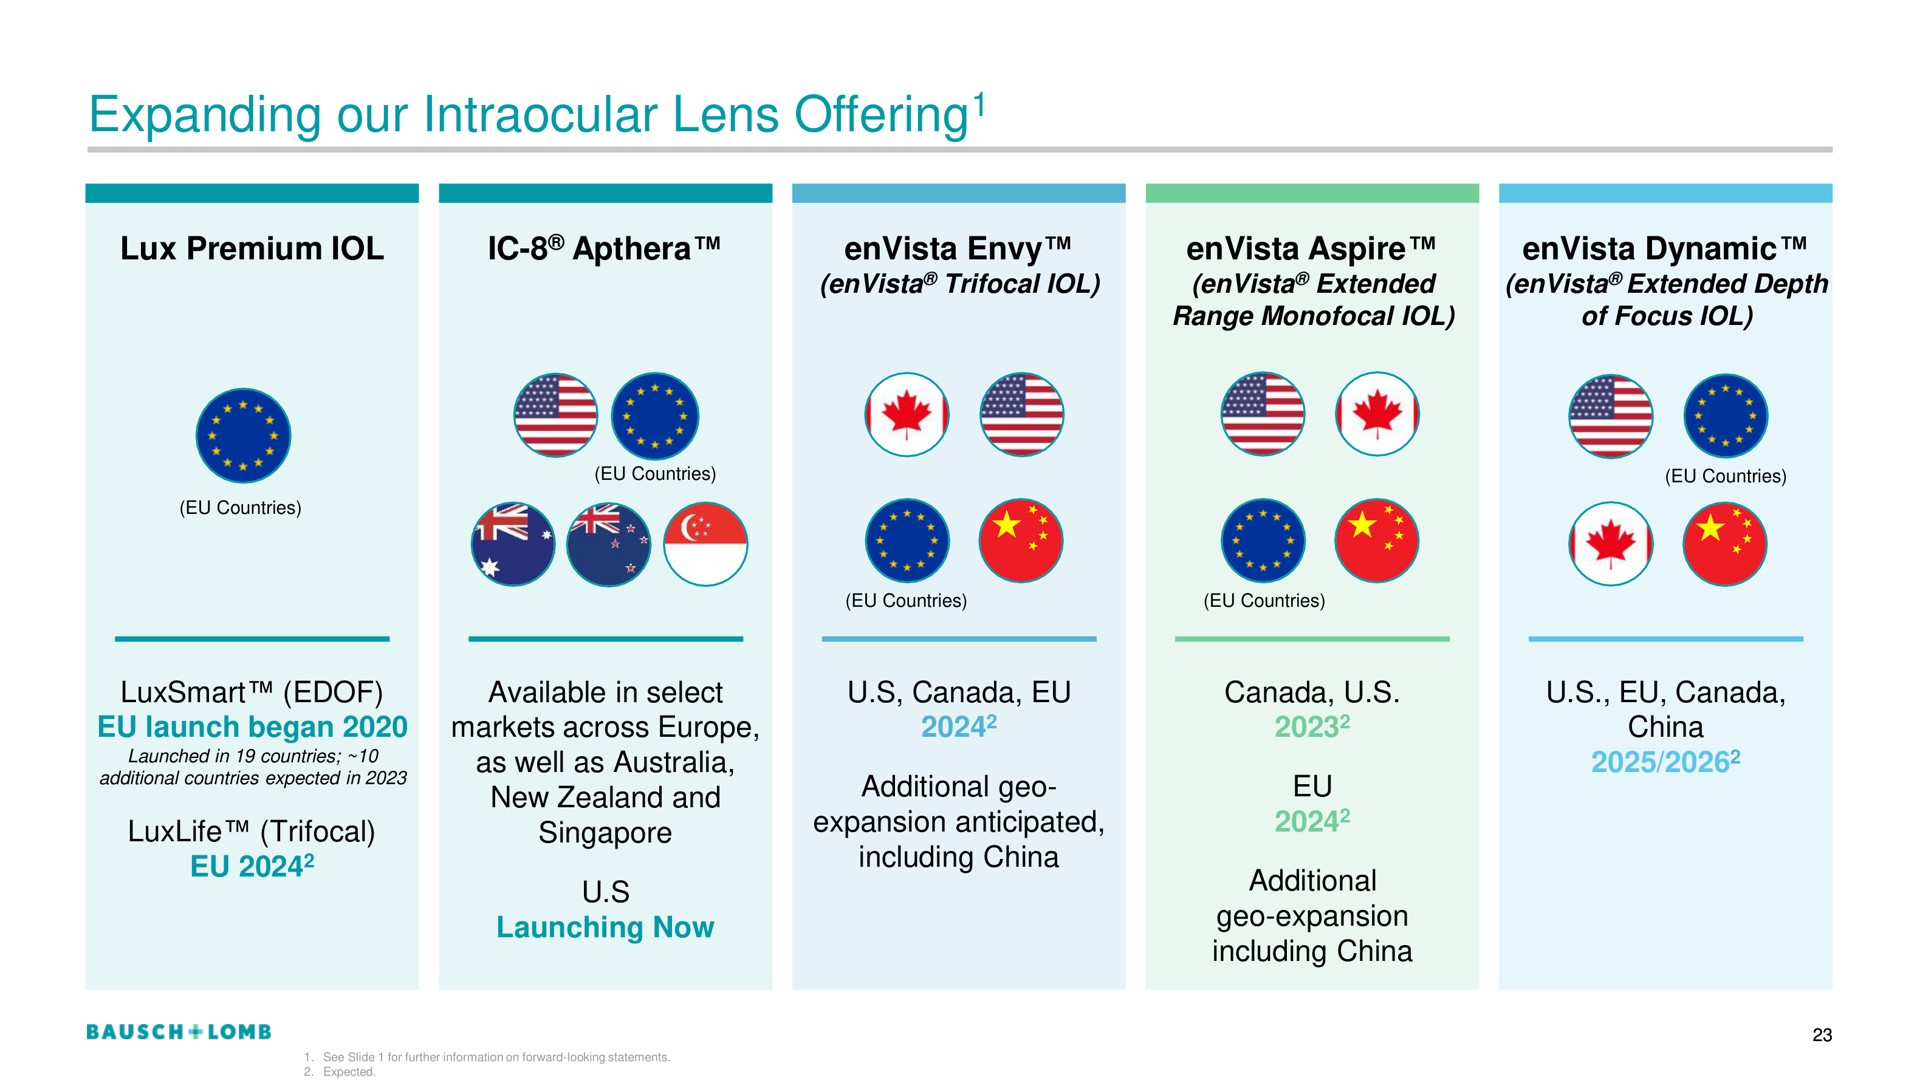 expanding our intraocular lens offering offering | Bausch+Lomb